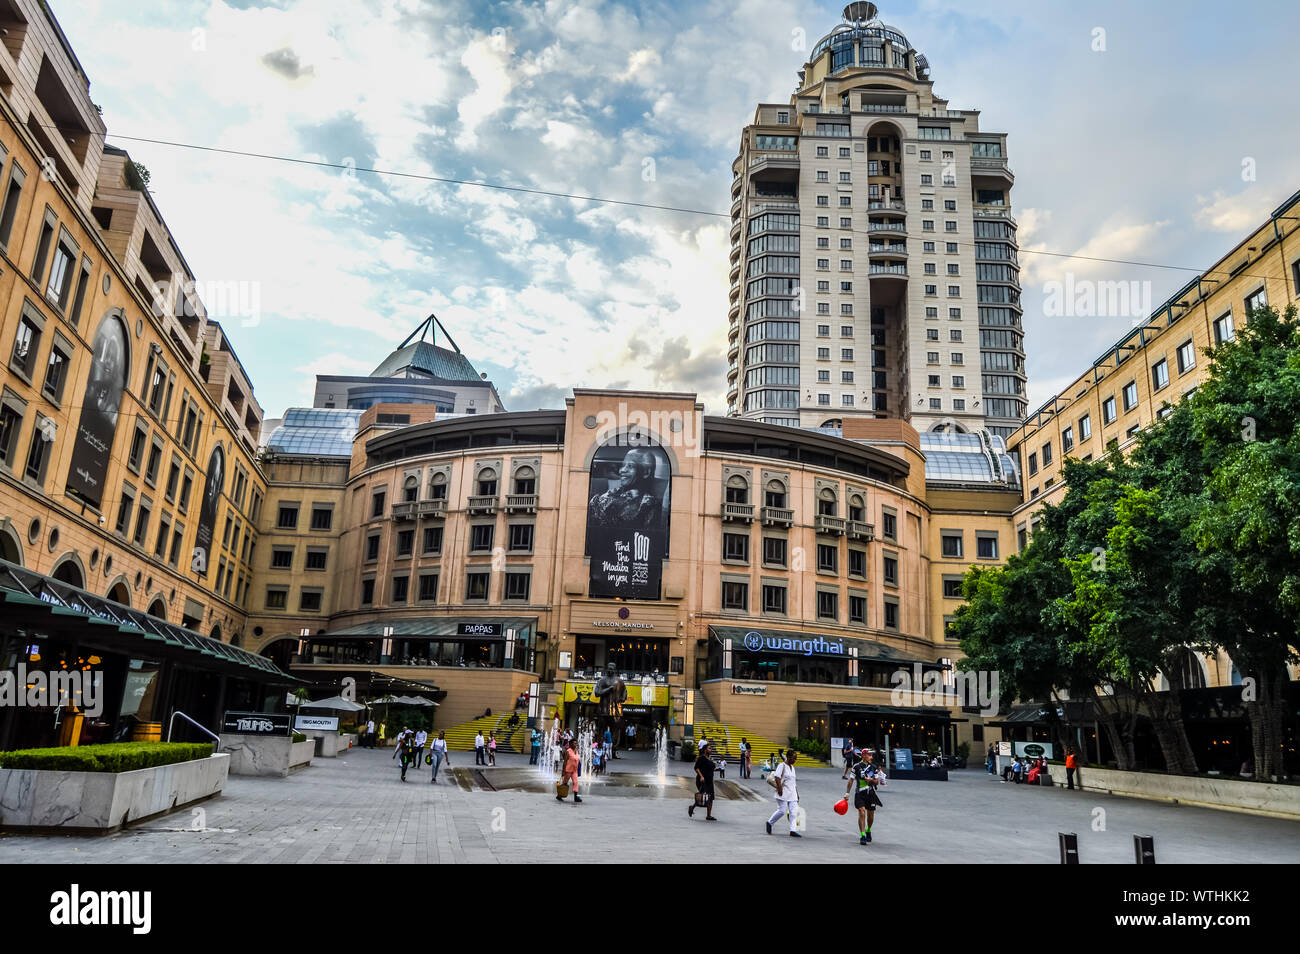 Sandton city mall and Nelson Mandela square with Statue of President Johannesburg Stock Photo